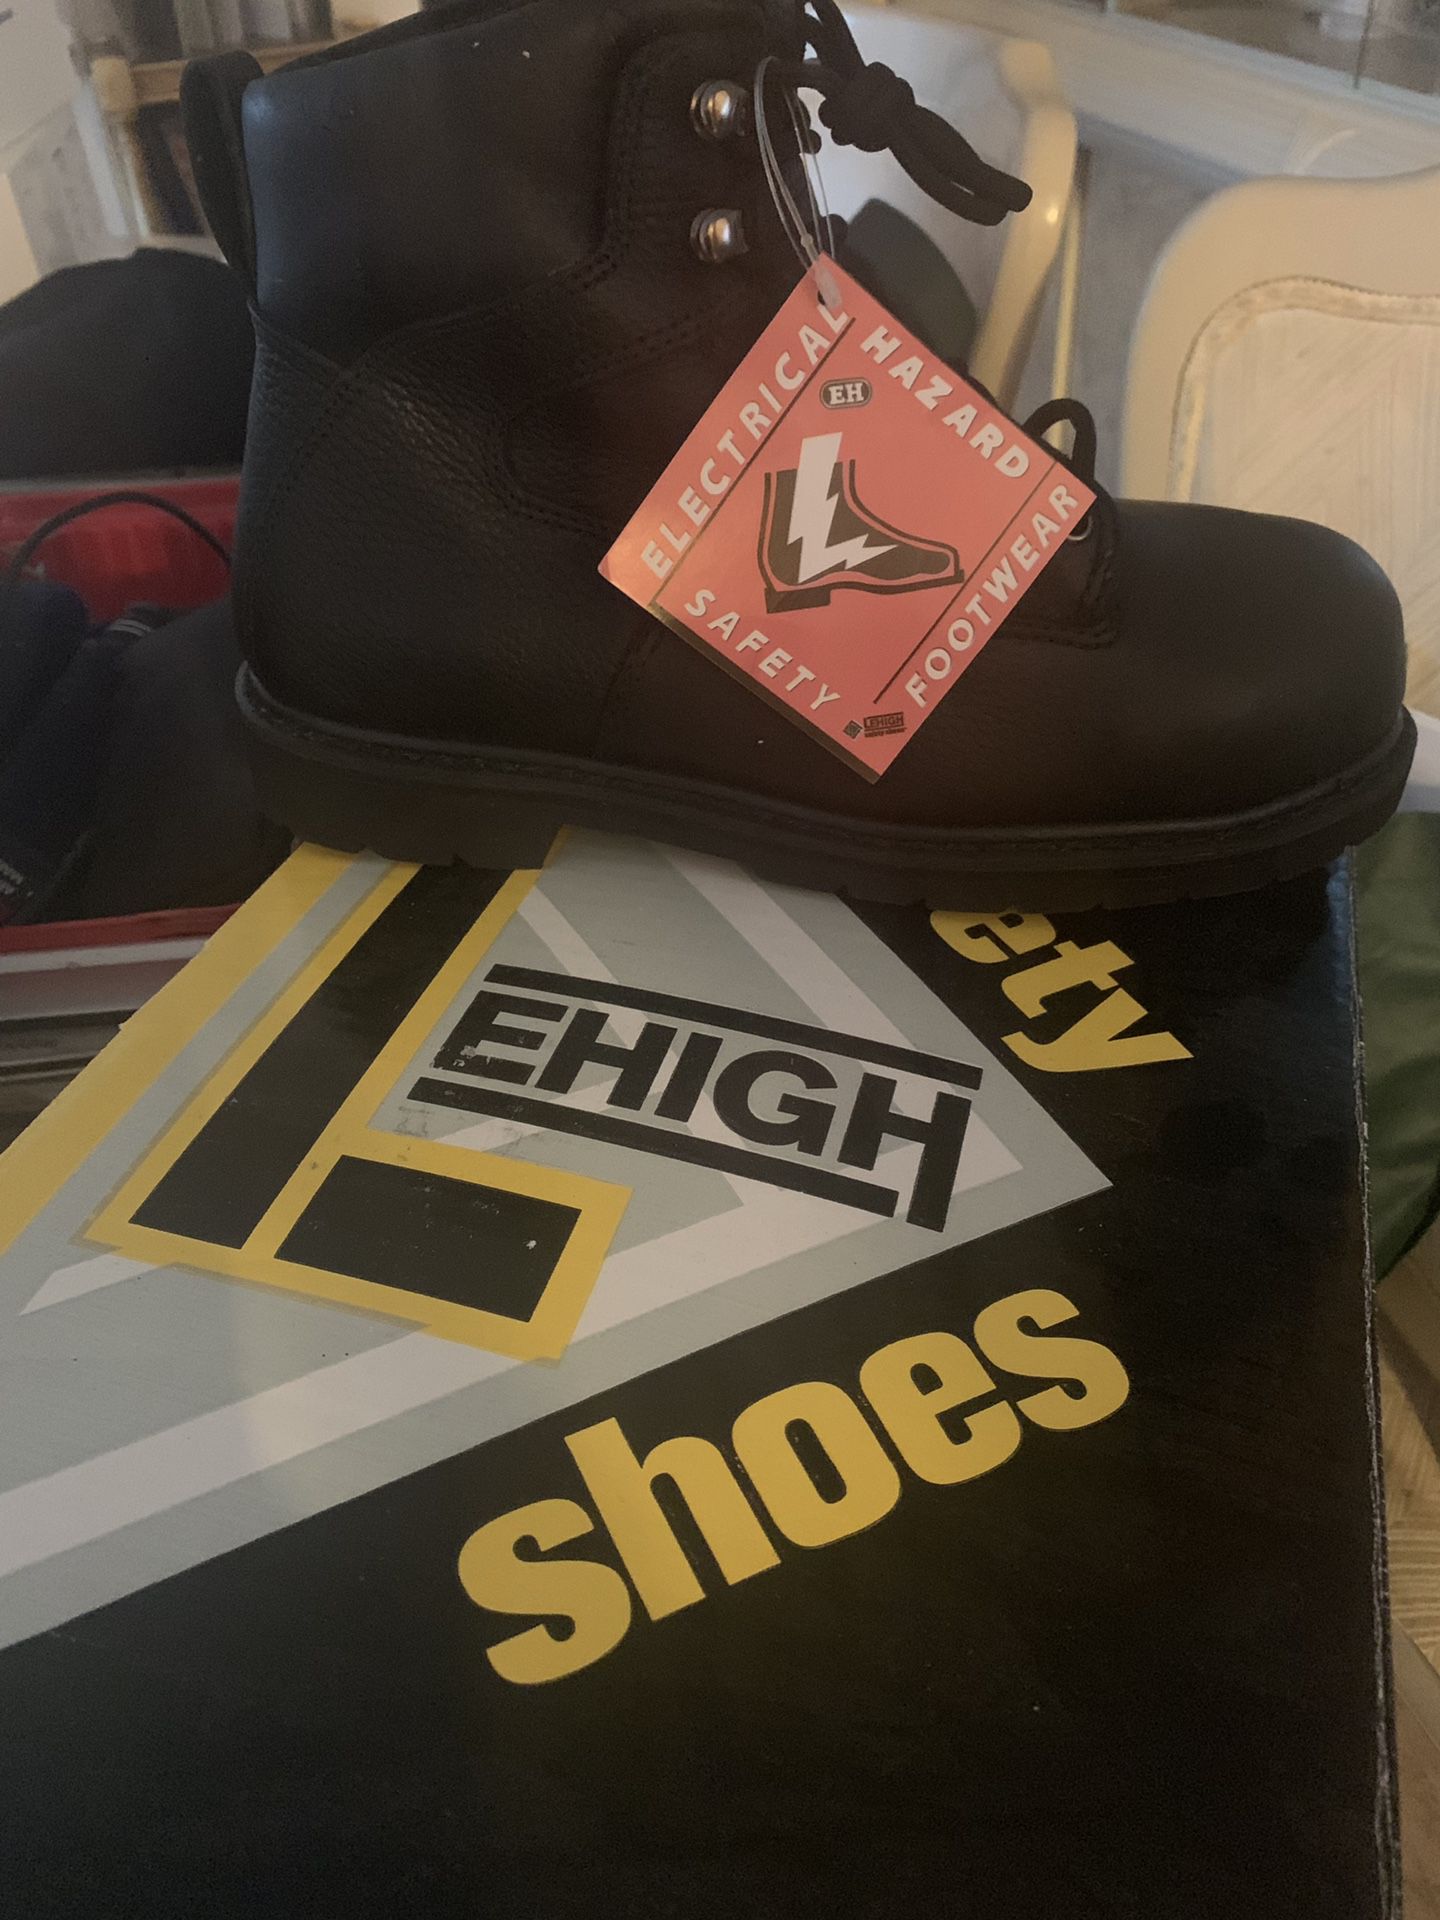 Lehigh Shoes. Working Boots. Size 8. Brand new Never Worn